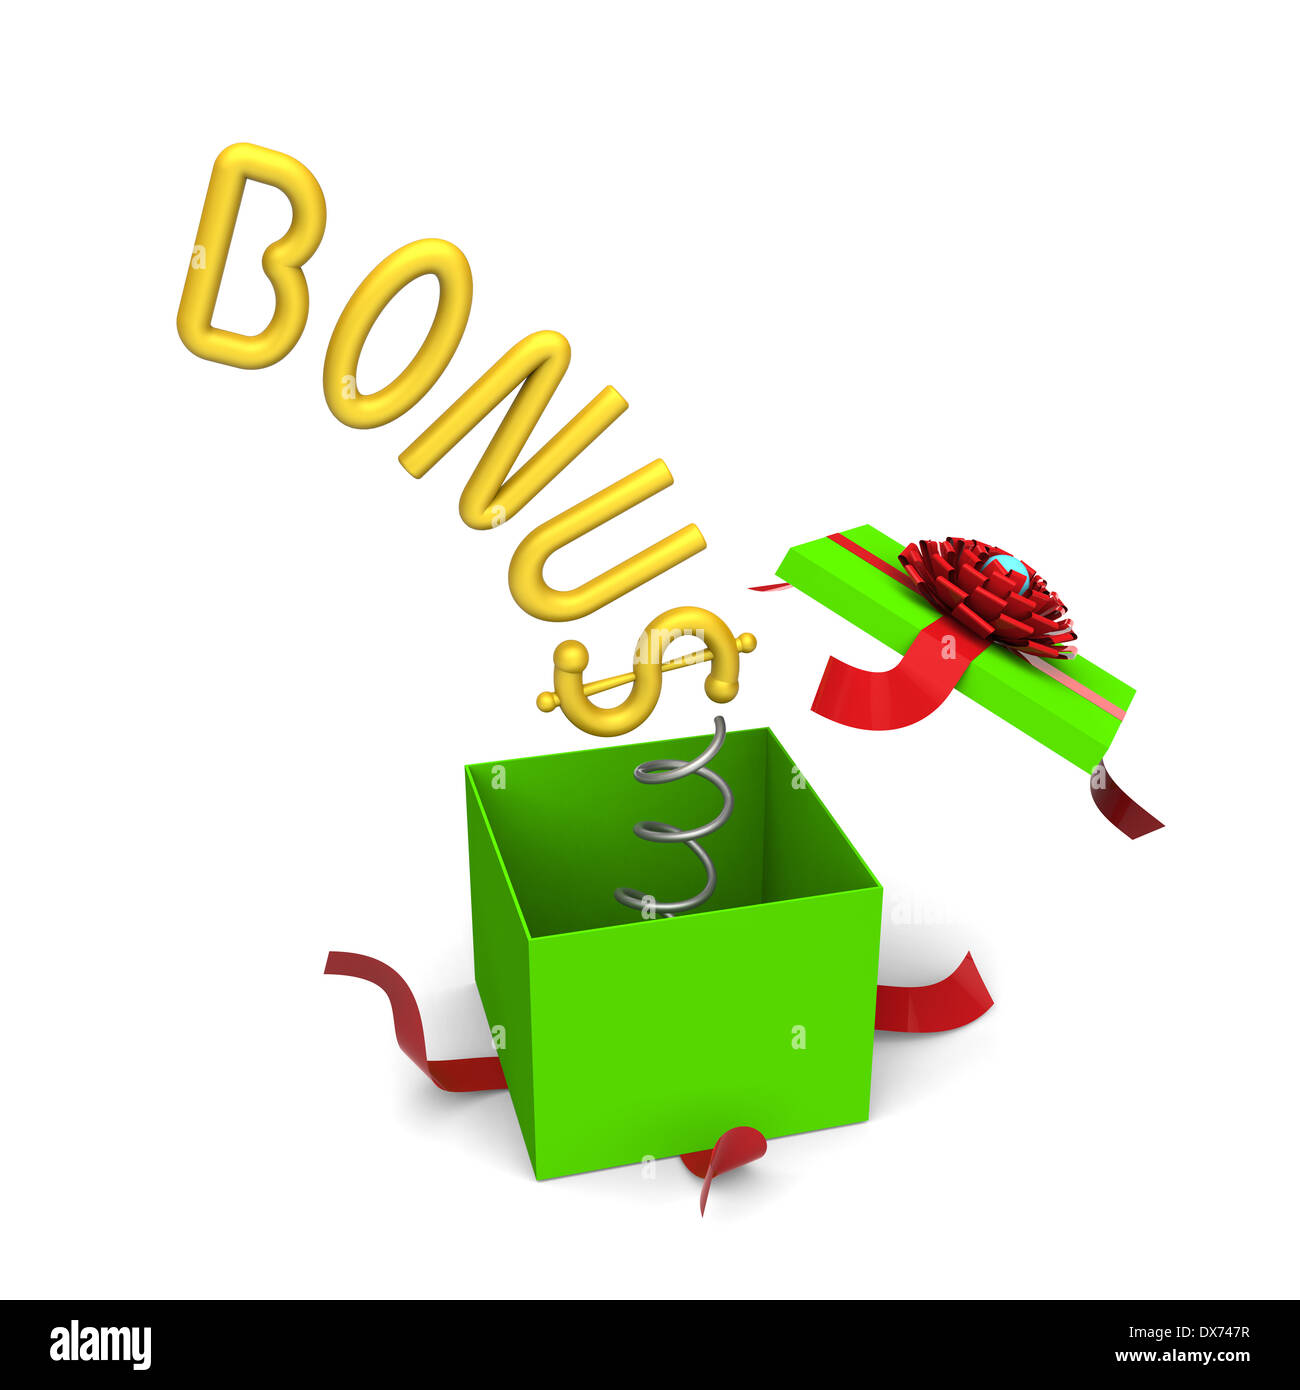 3D of bonus symbol springing out from a green gift box Stock Photo